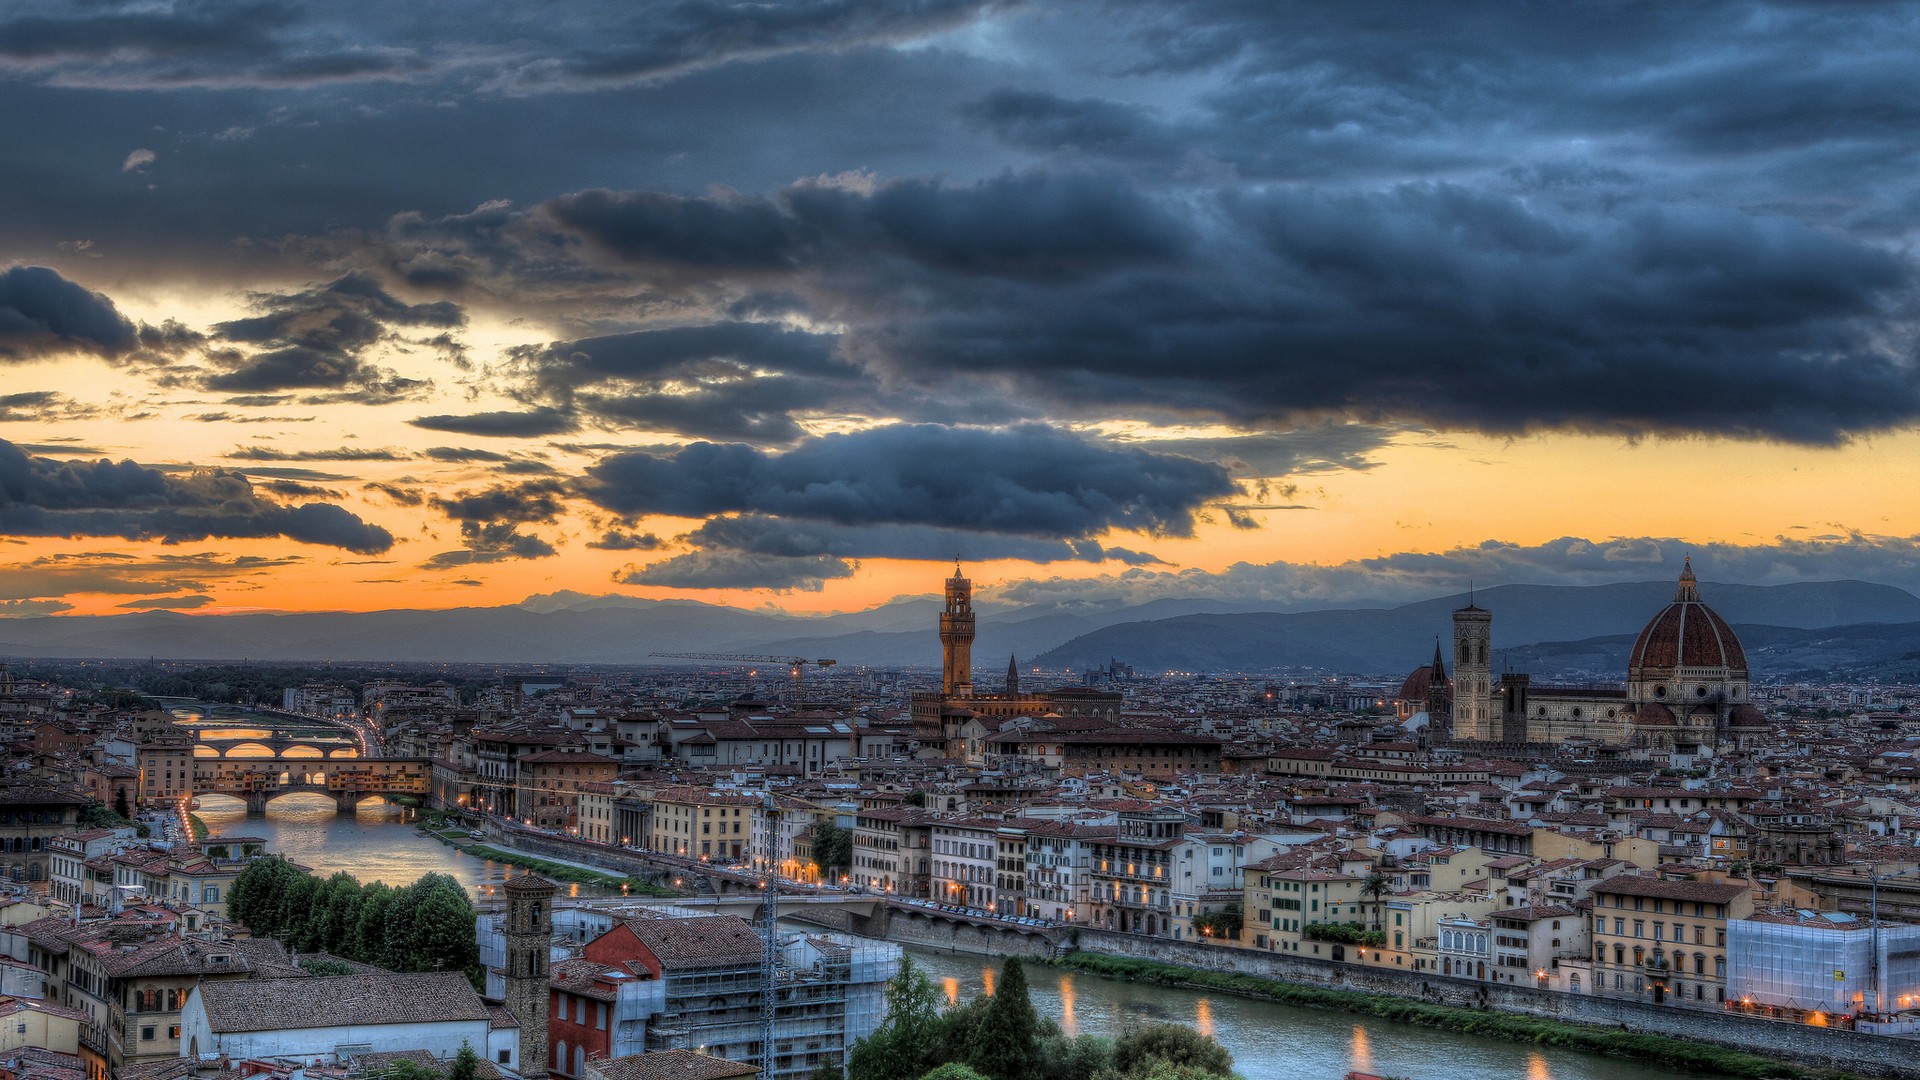 Florence, Italy, City, Cityscape, Architecture, Florence Cathedral, Gothic architecture, River, Sunset, Clouds Wallpaper